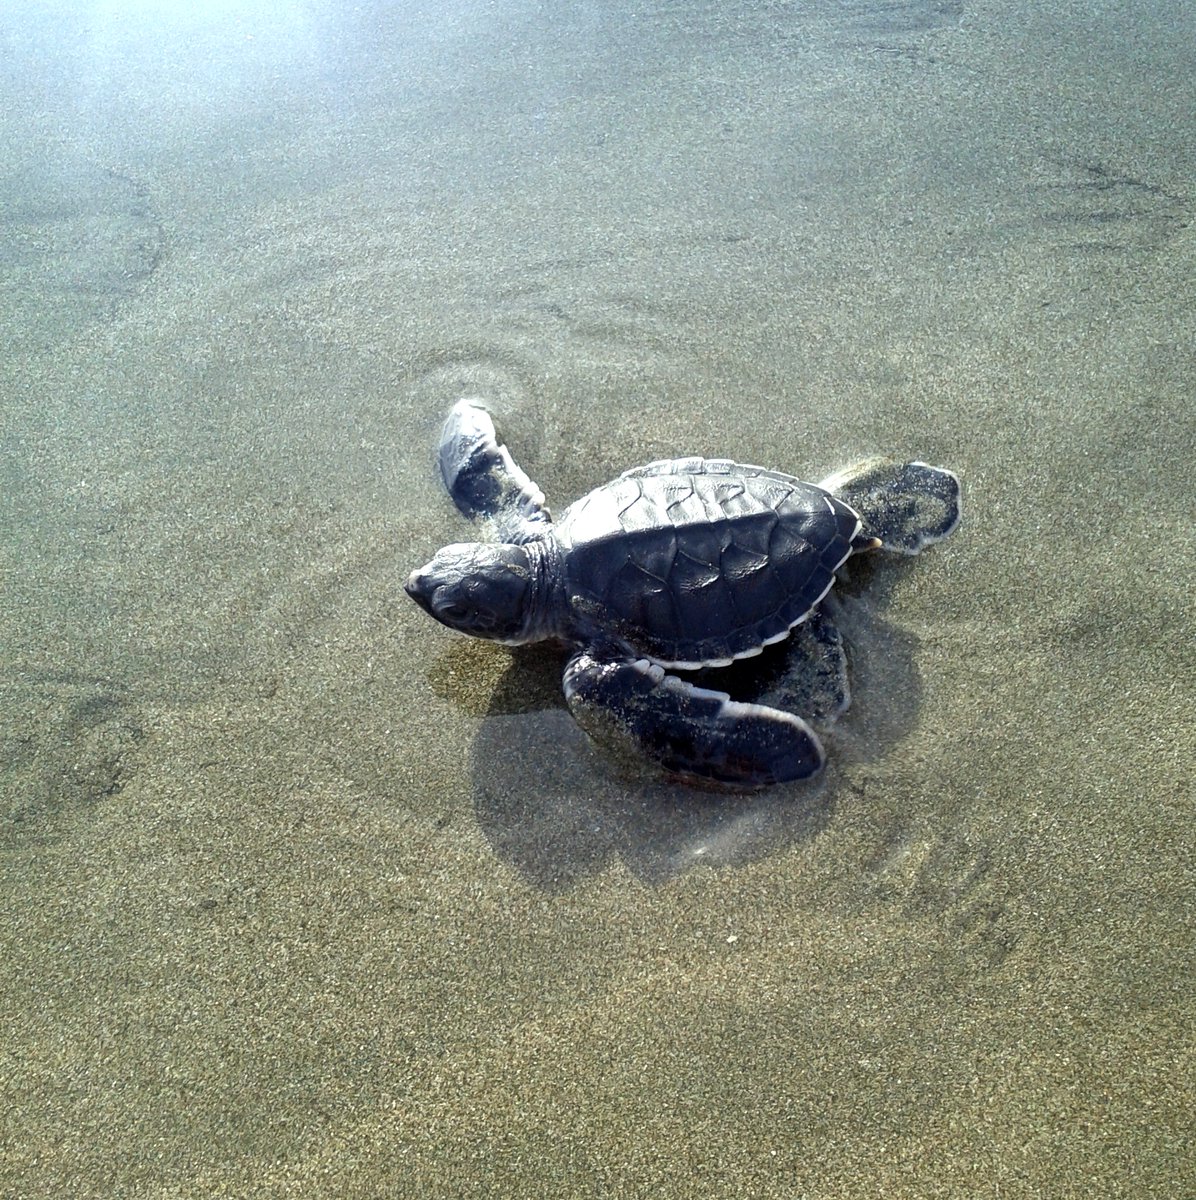 This little made it safely to the ocean with persistence. Keep going ~ goals and intentions are reached through micro, persistent steps forward! 🌊  #StokeYourBliss #MondayVibes✨ #SeaTurtles #WholePlantHemp #HempSkincare #HempTopicals #NaturopathicMedicine  #Nurtrium